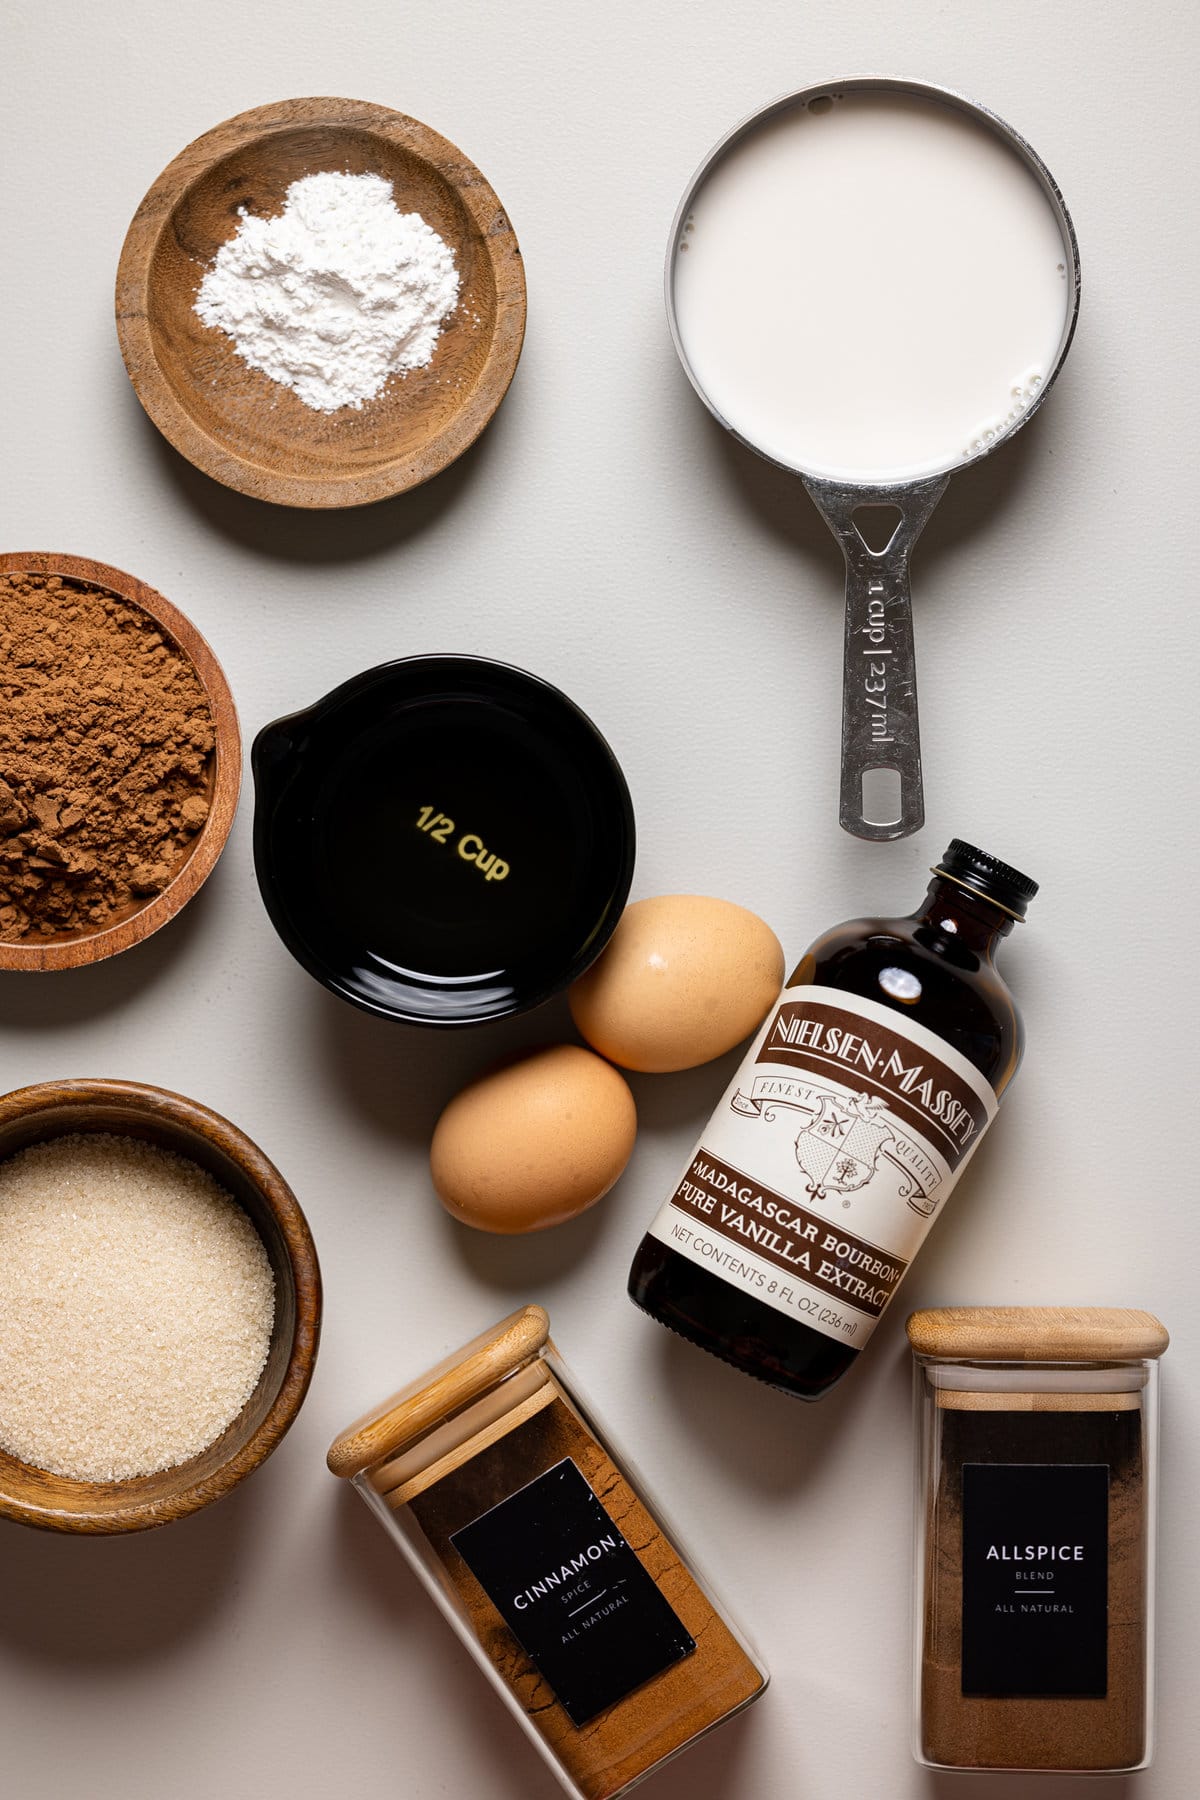 Ingredients for Chocolate Sweet Potato Cupcakes including eggs, vanilla extract, and allspice